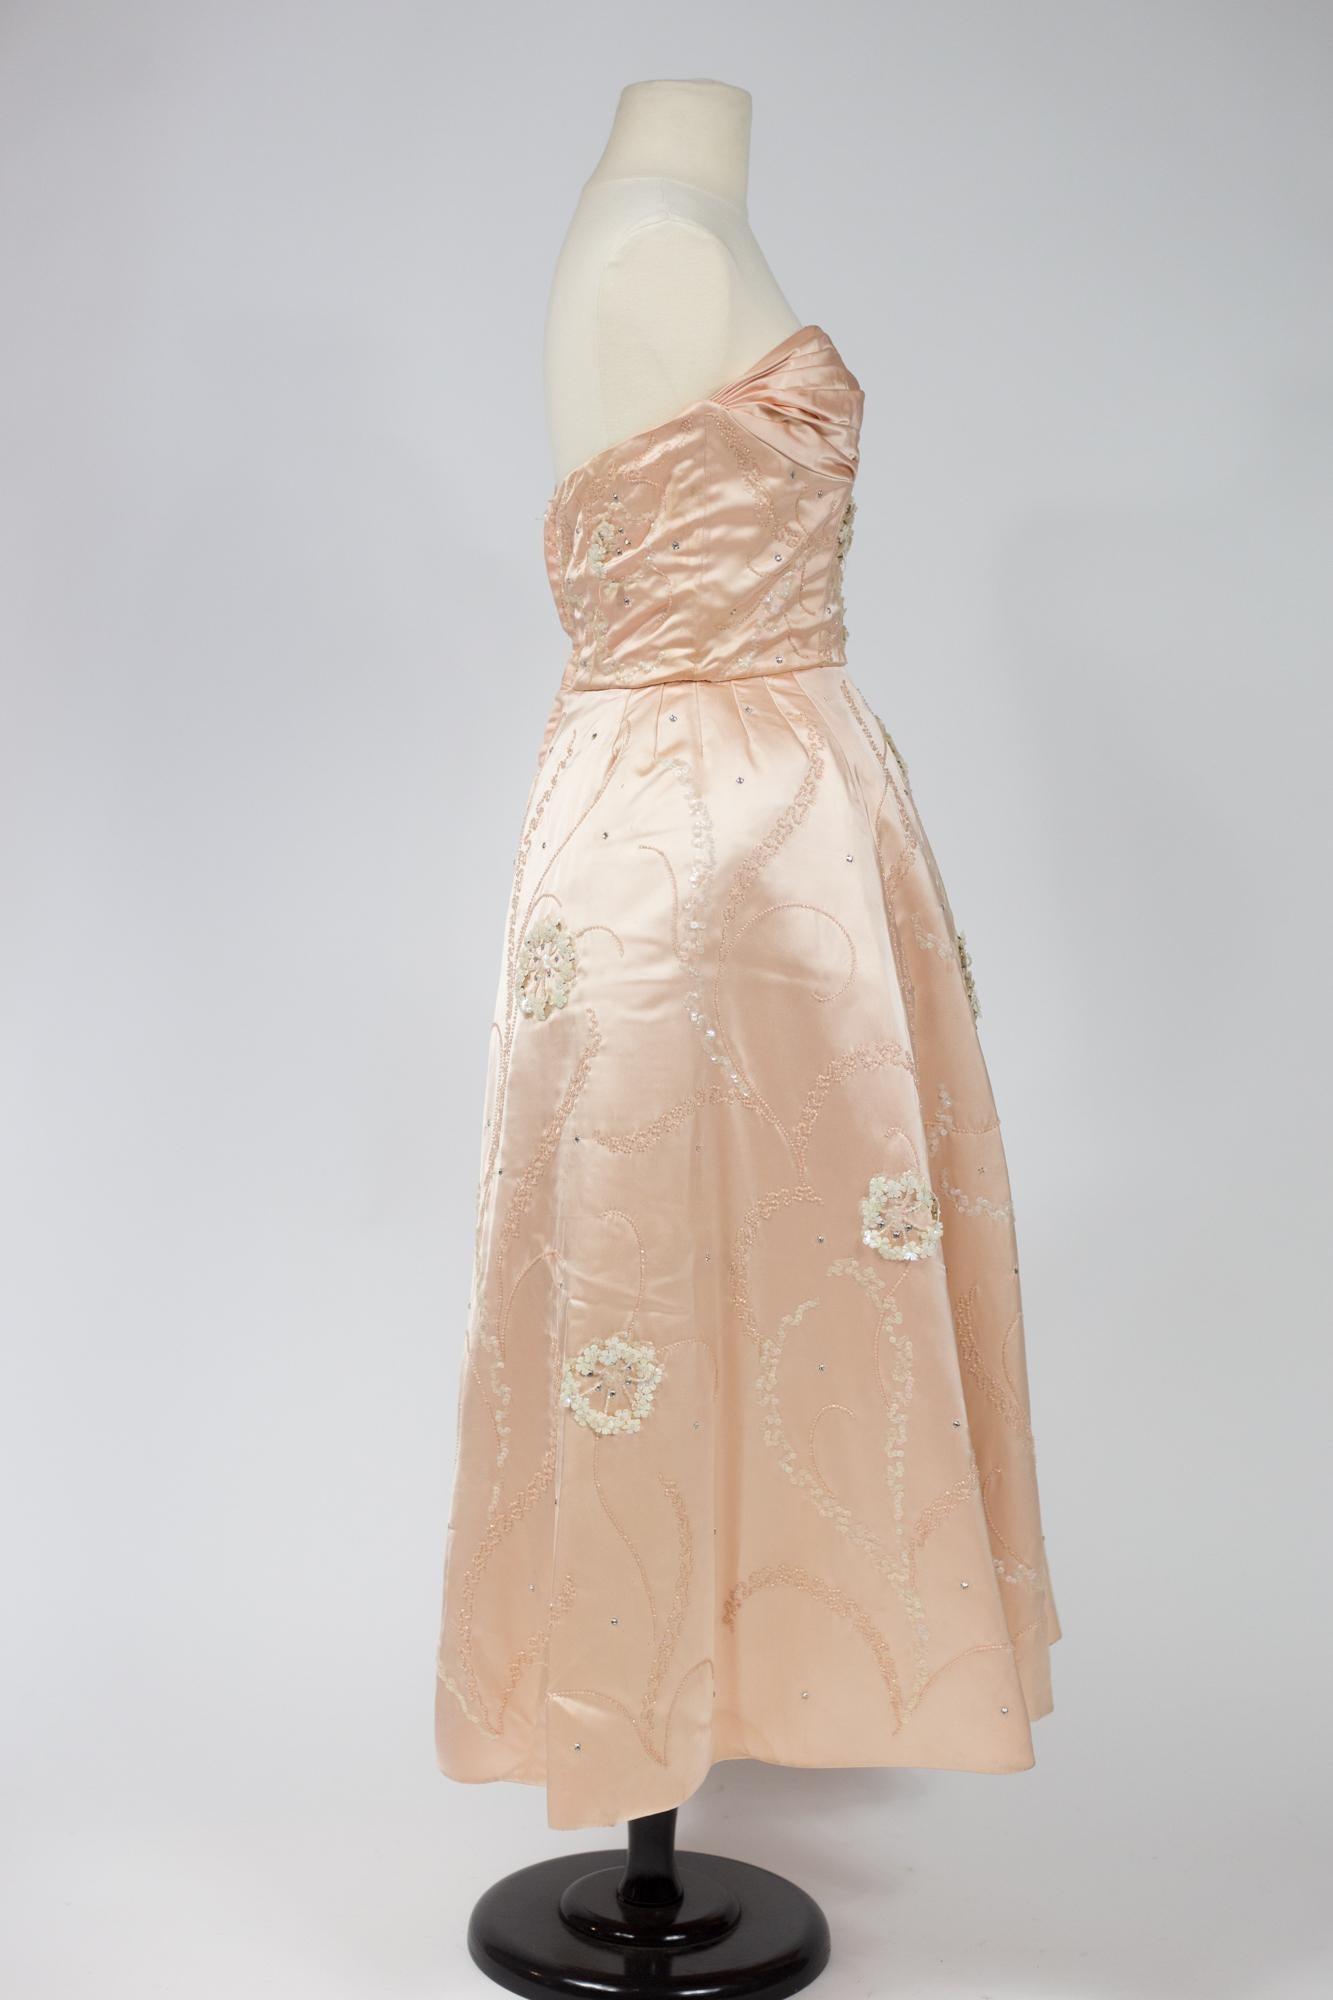 A Satin Embroidered Ball Gown by Harvey Berin Designed by Karen Stark Circa 1955 In Good Condition For Sale In Toulon, FR